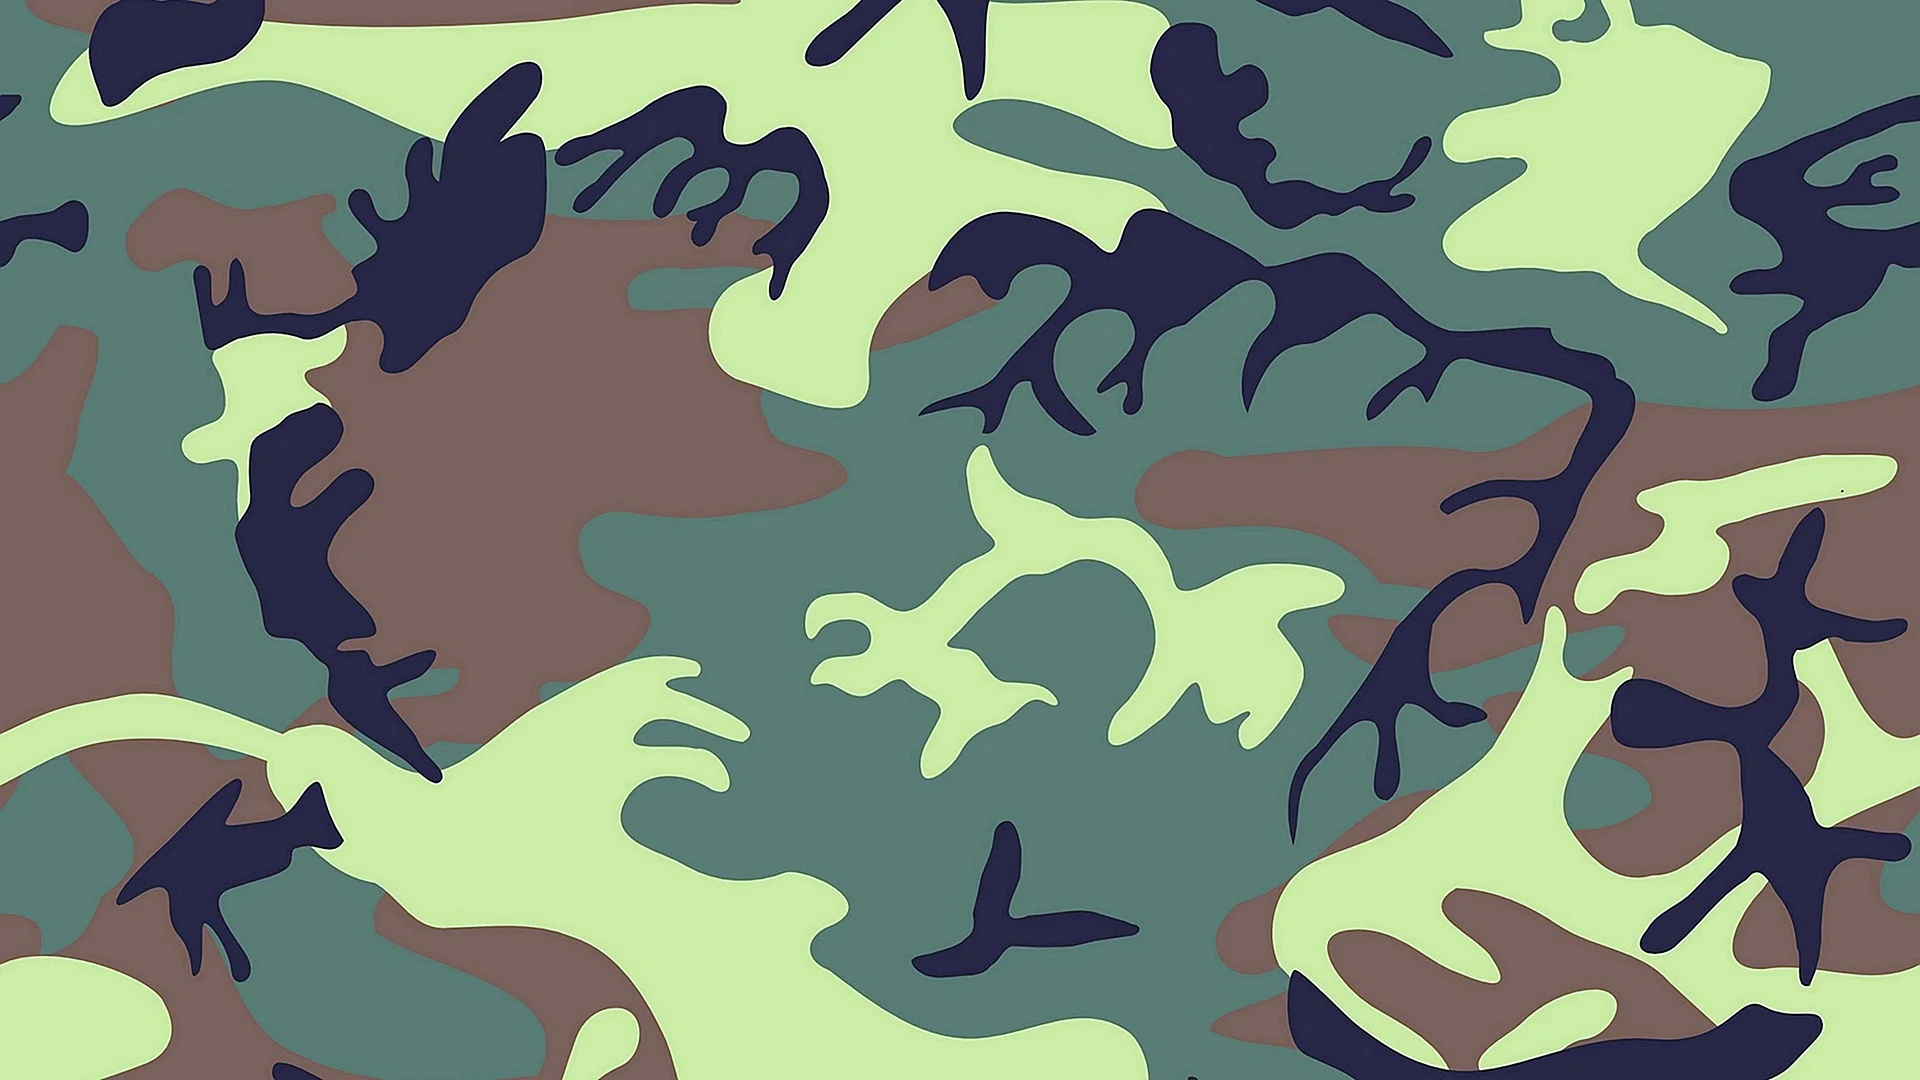 Military Camouflage Patterns Wallpaper